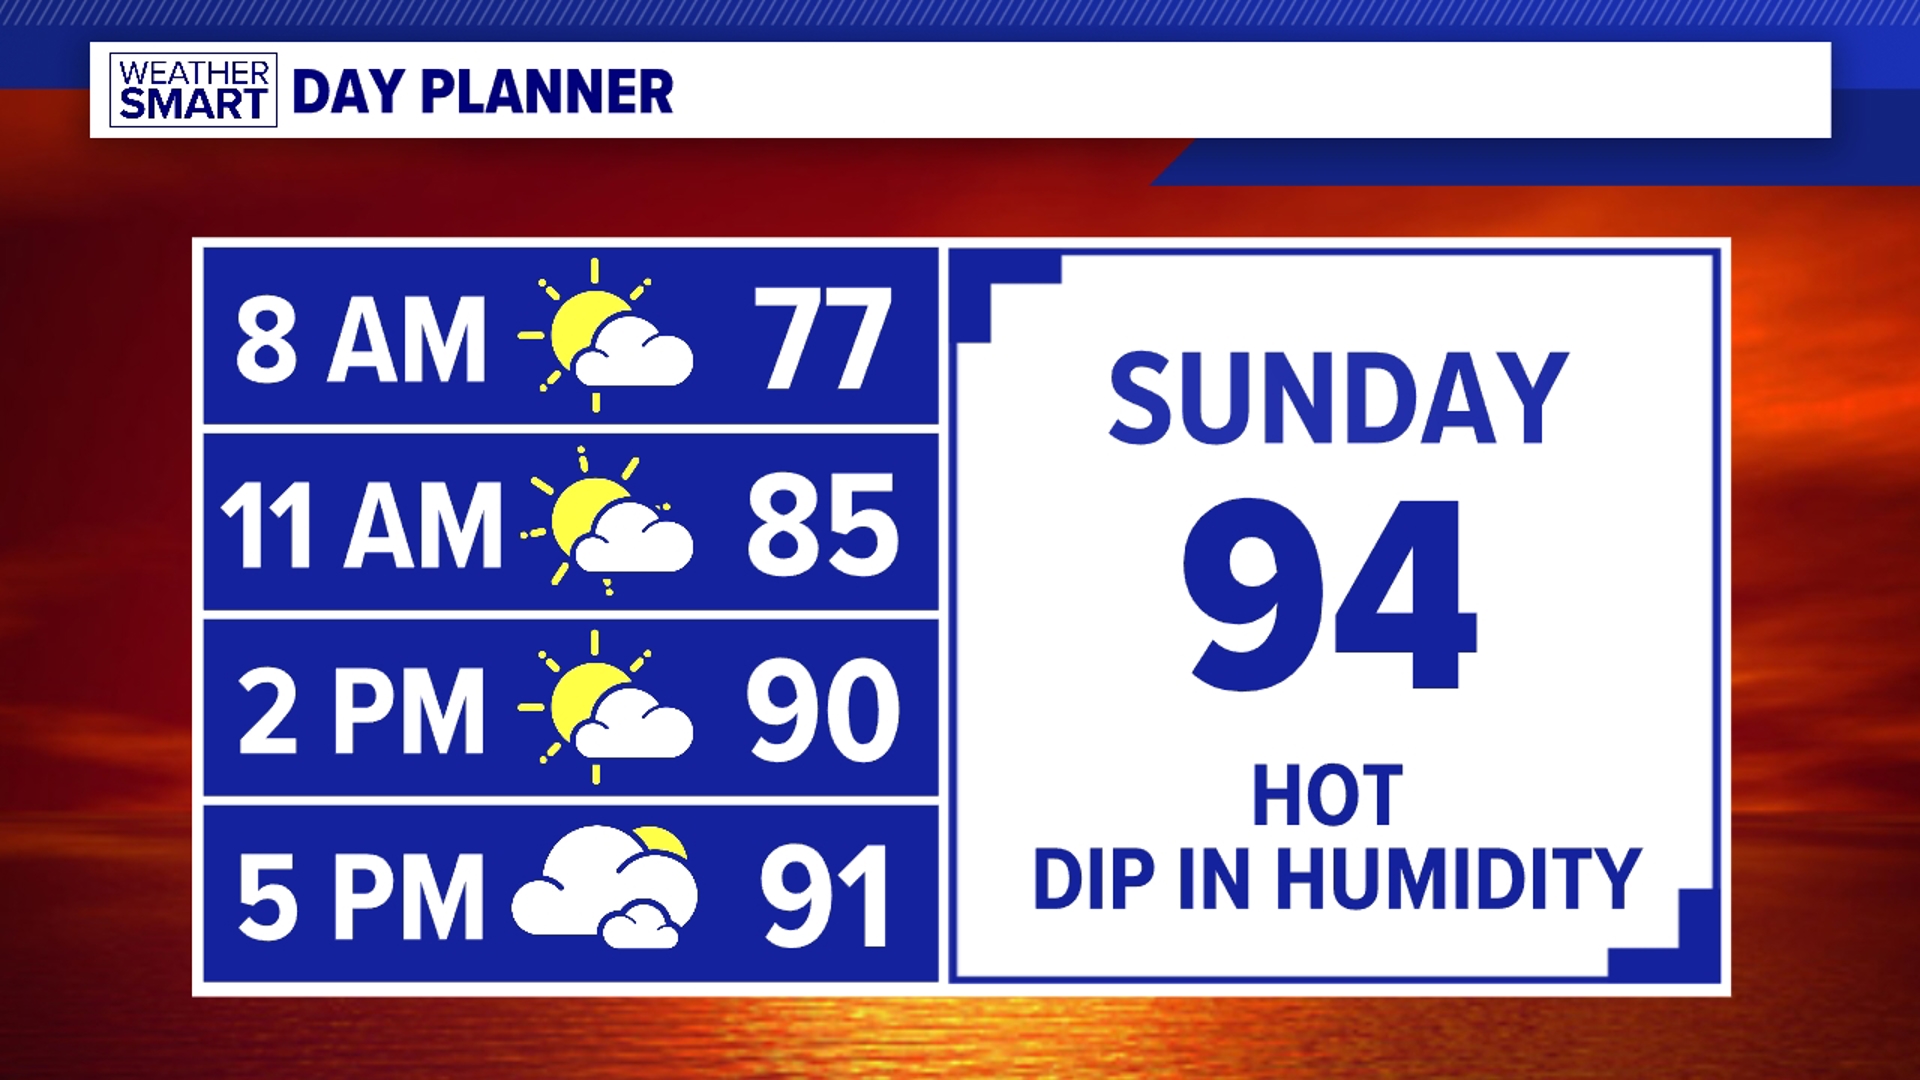 A little better when it comes to humidity, but it's still hot Sunday!